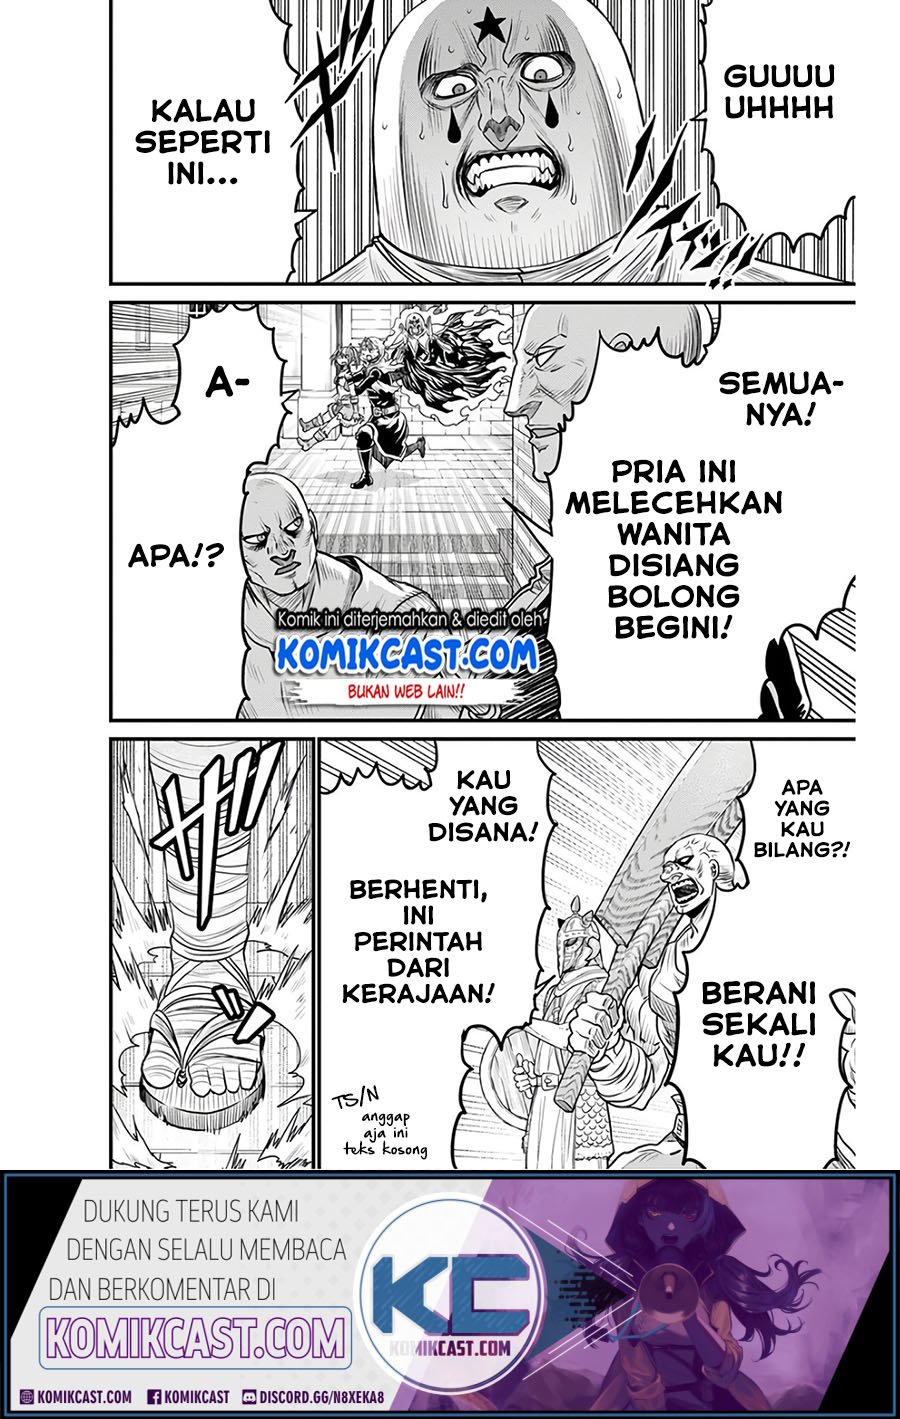 Peter Grill to Kenja no Jikan Chapter 28-1